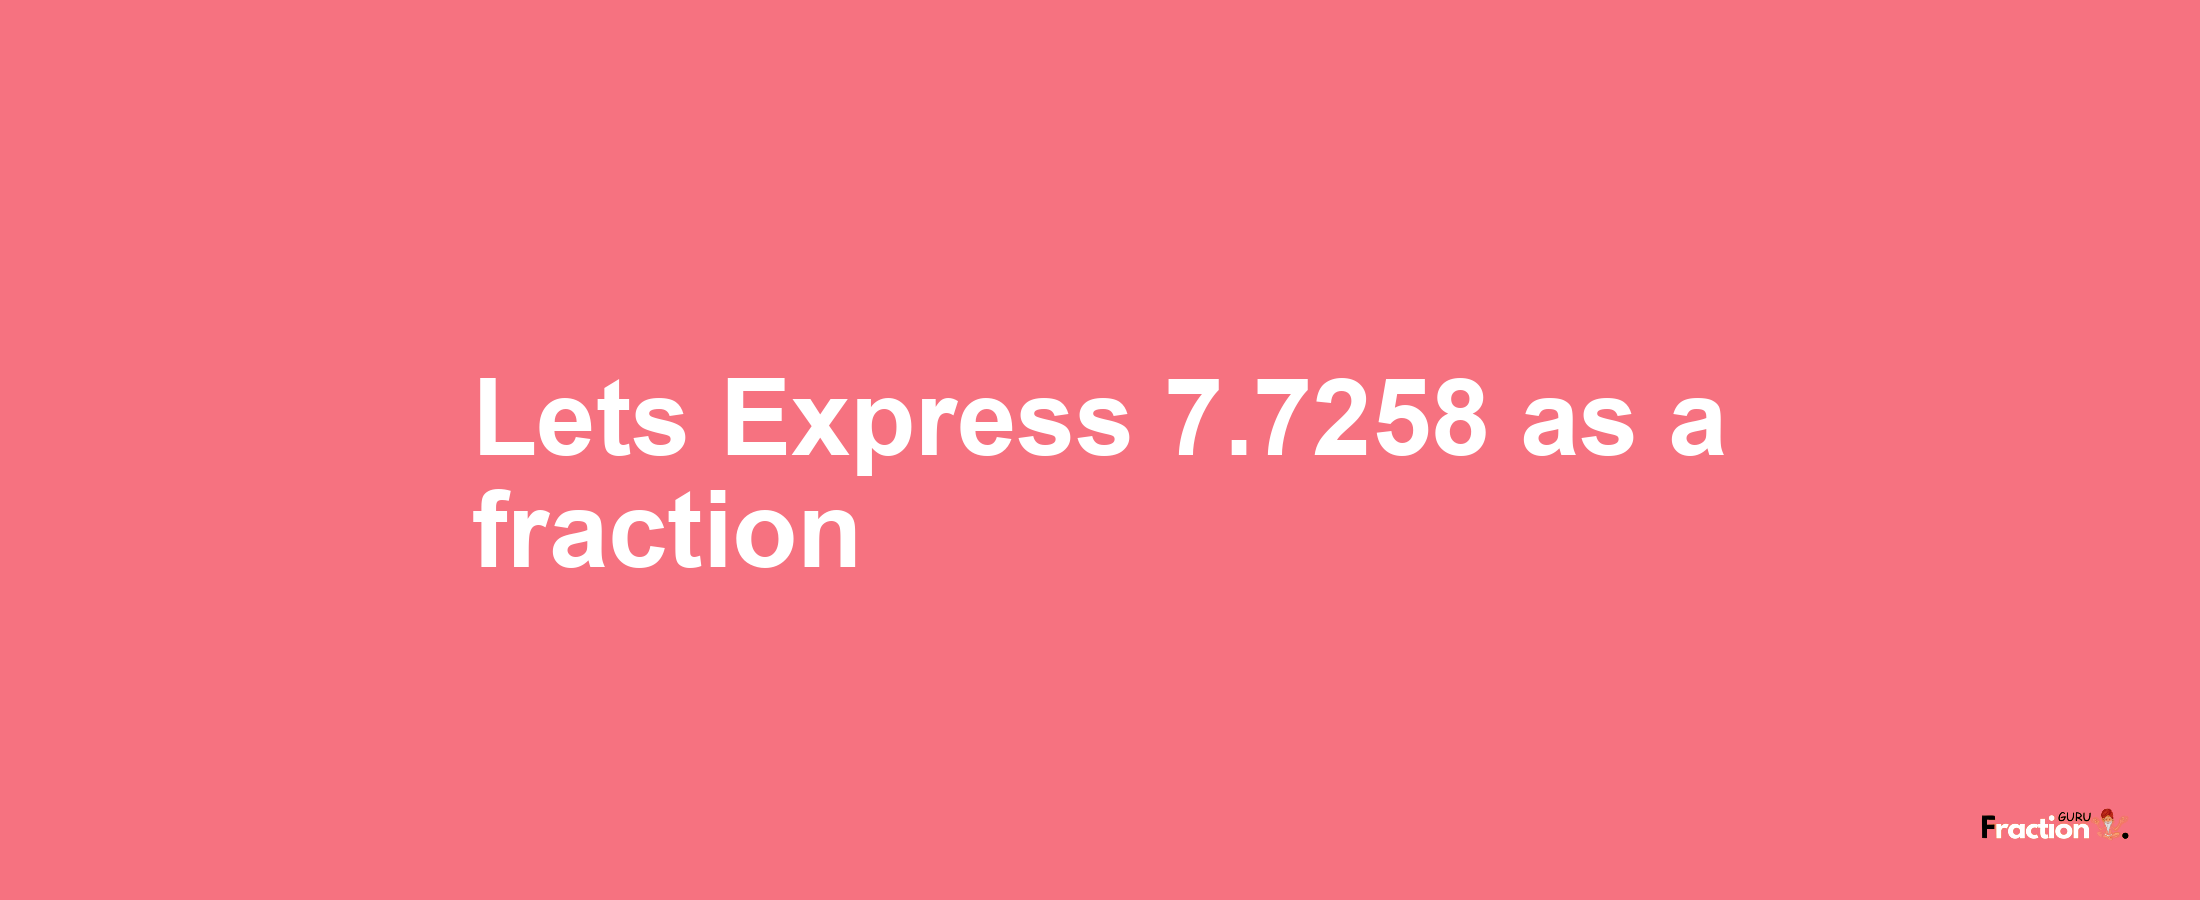 Lets Express 7.7258 as afraction